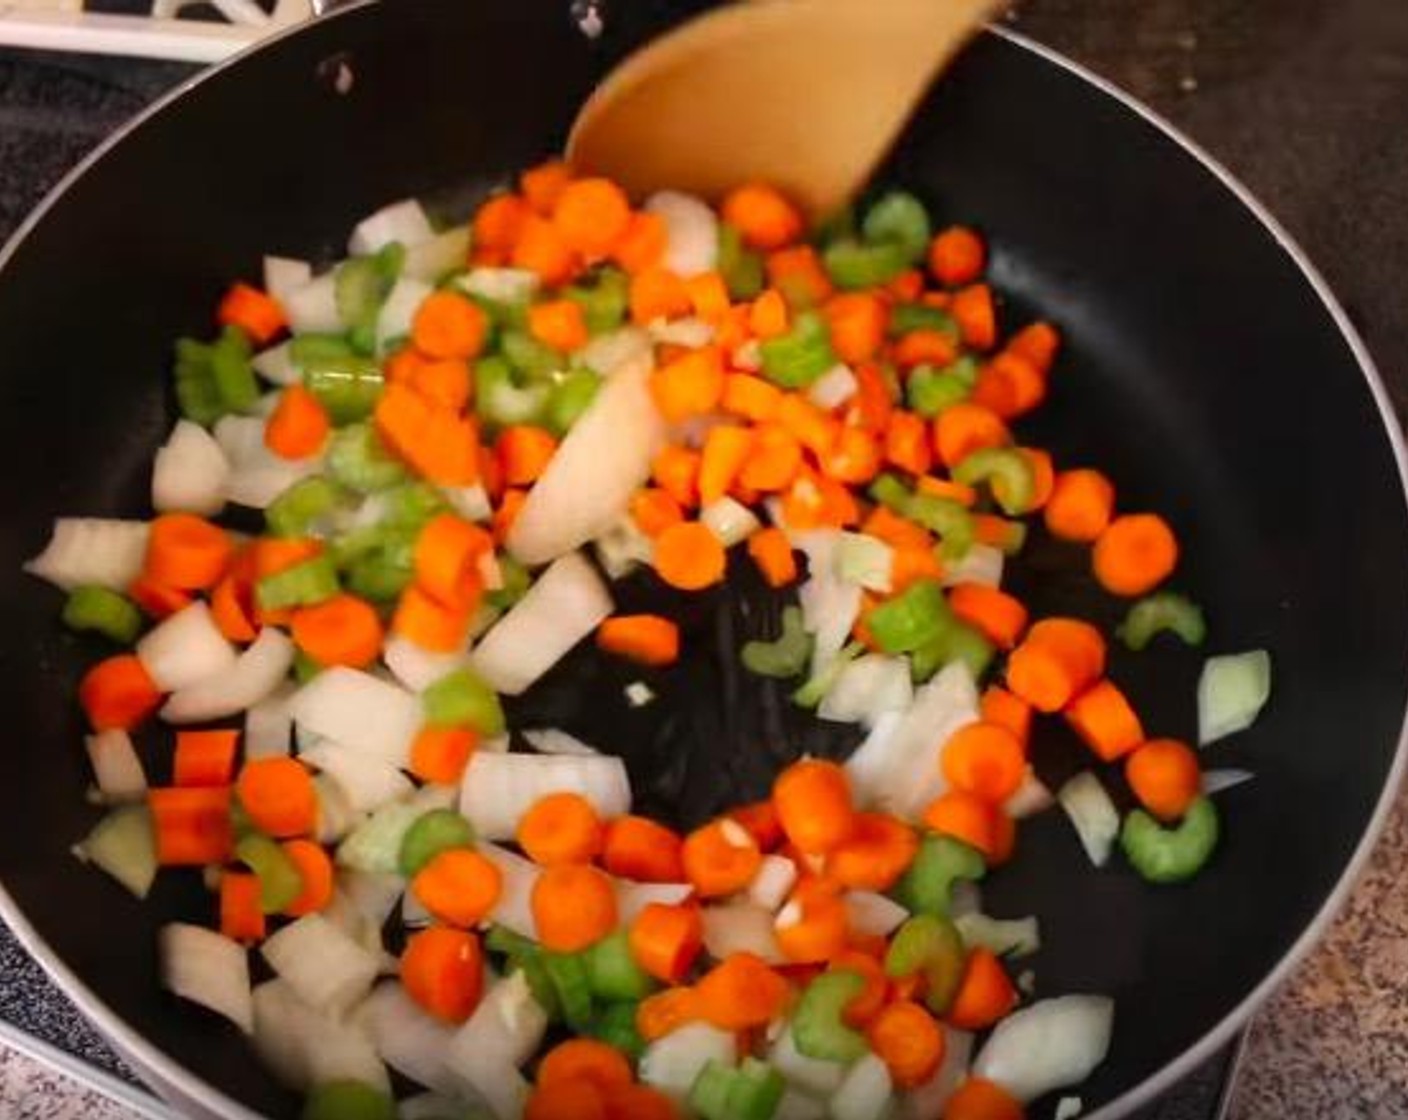 step 1 For the braising sauce, heat Olive Oil (1 Tbsp) in a large pan over medium heat. Add Onion (1/2 cup), Celery (1/2 cup), and Carrot (1/2 cup) and sauté for 2-3 minutes.